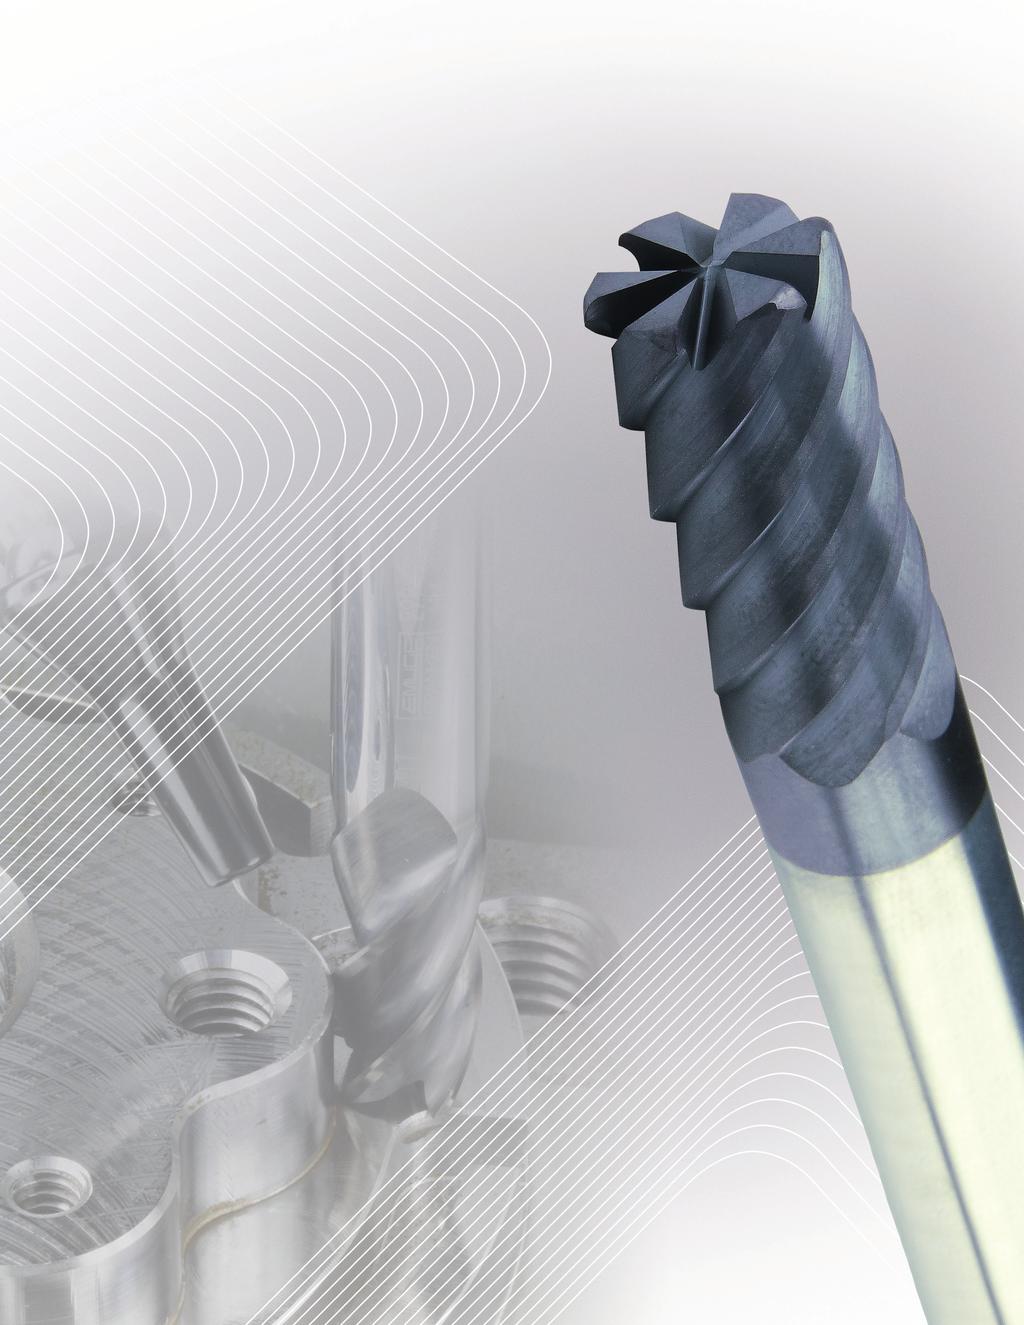 Emuge ard-cut igh Performance End Mills for ard Milling Applications. TM ard-cut End Mills were specifically developed for the machining of hardened materials up to RC.